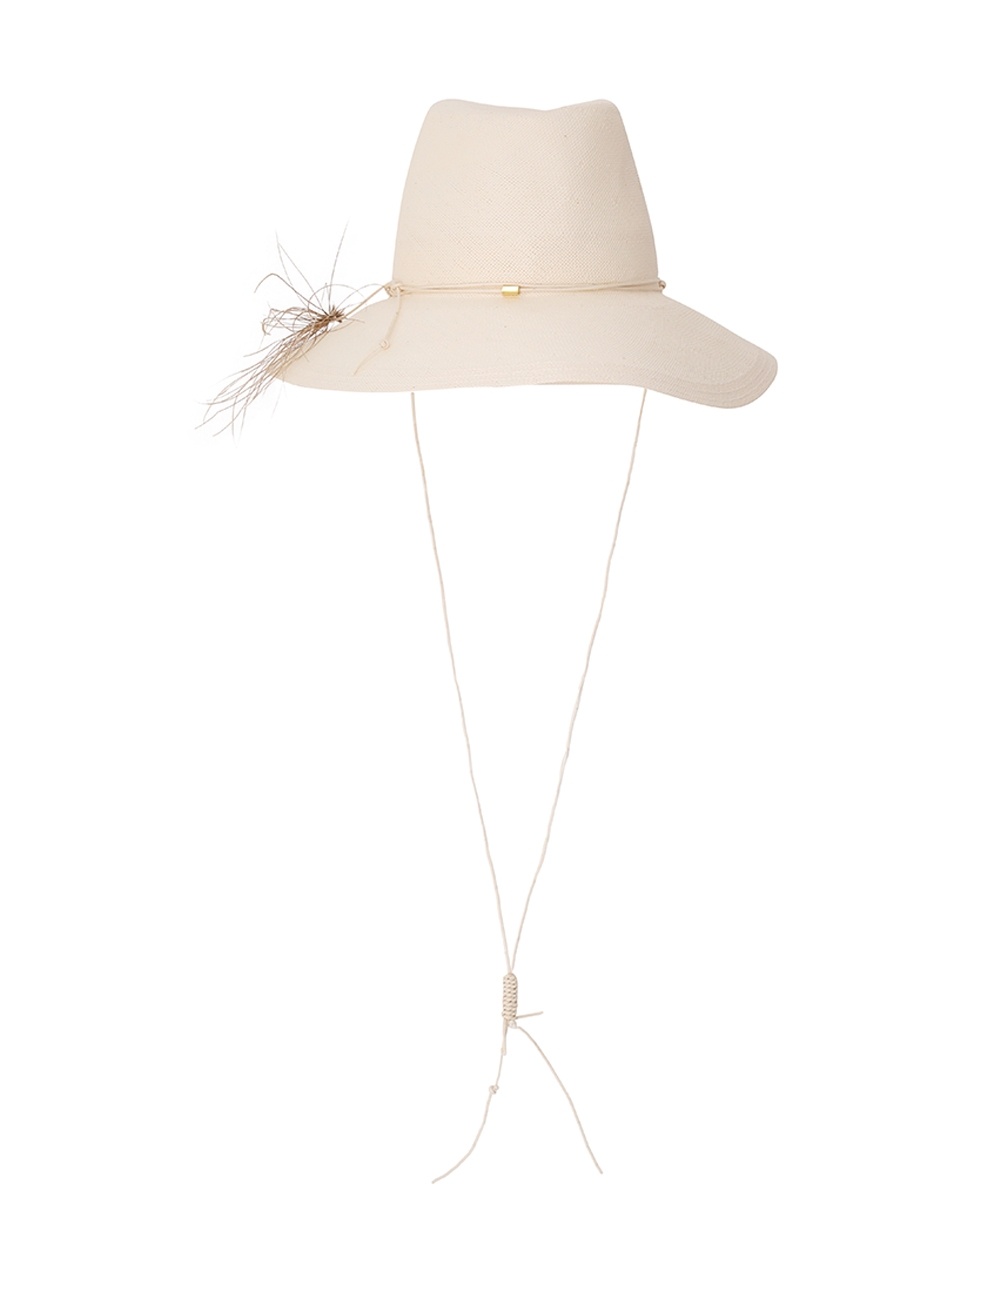 GLAZED STRAW COLLAPSIBLE HAT - 4